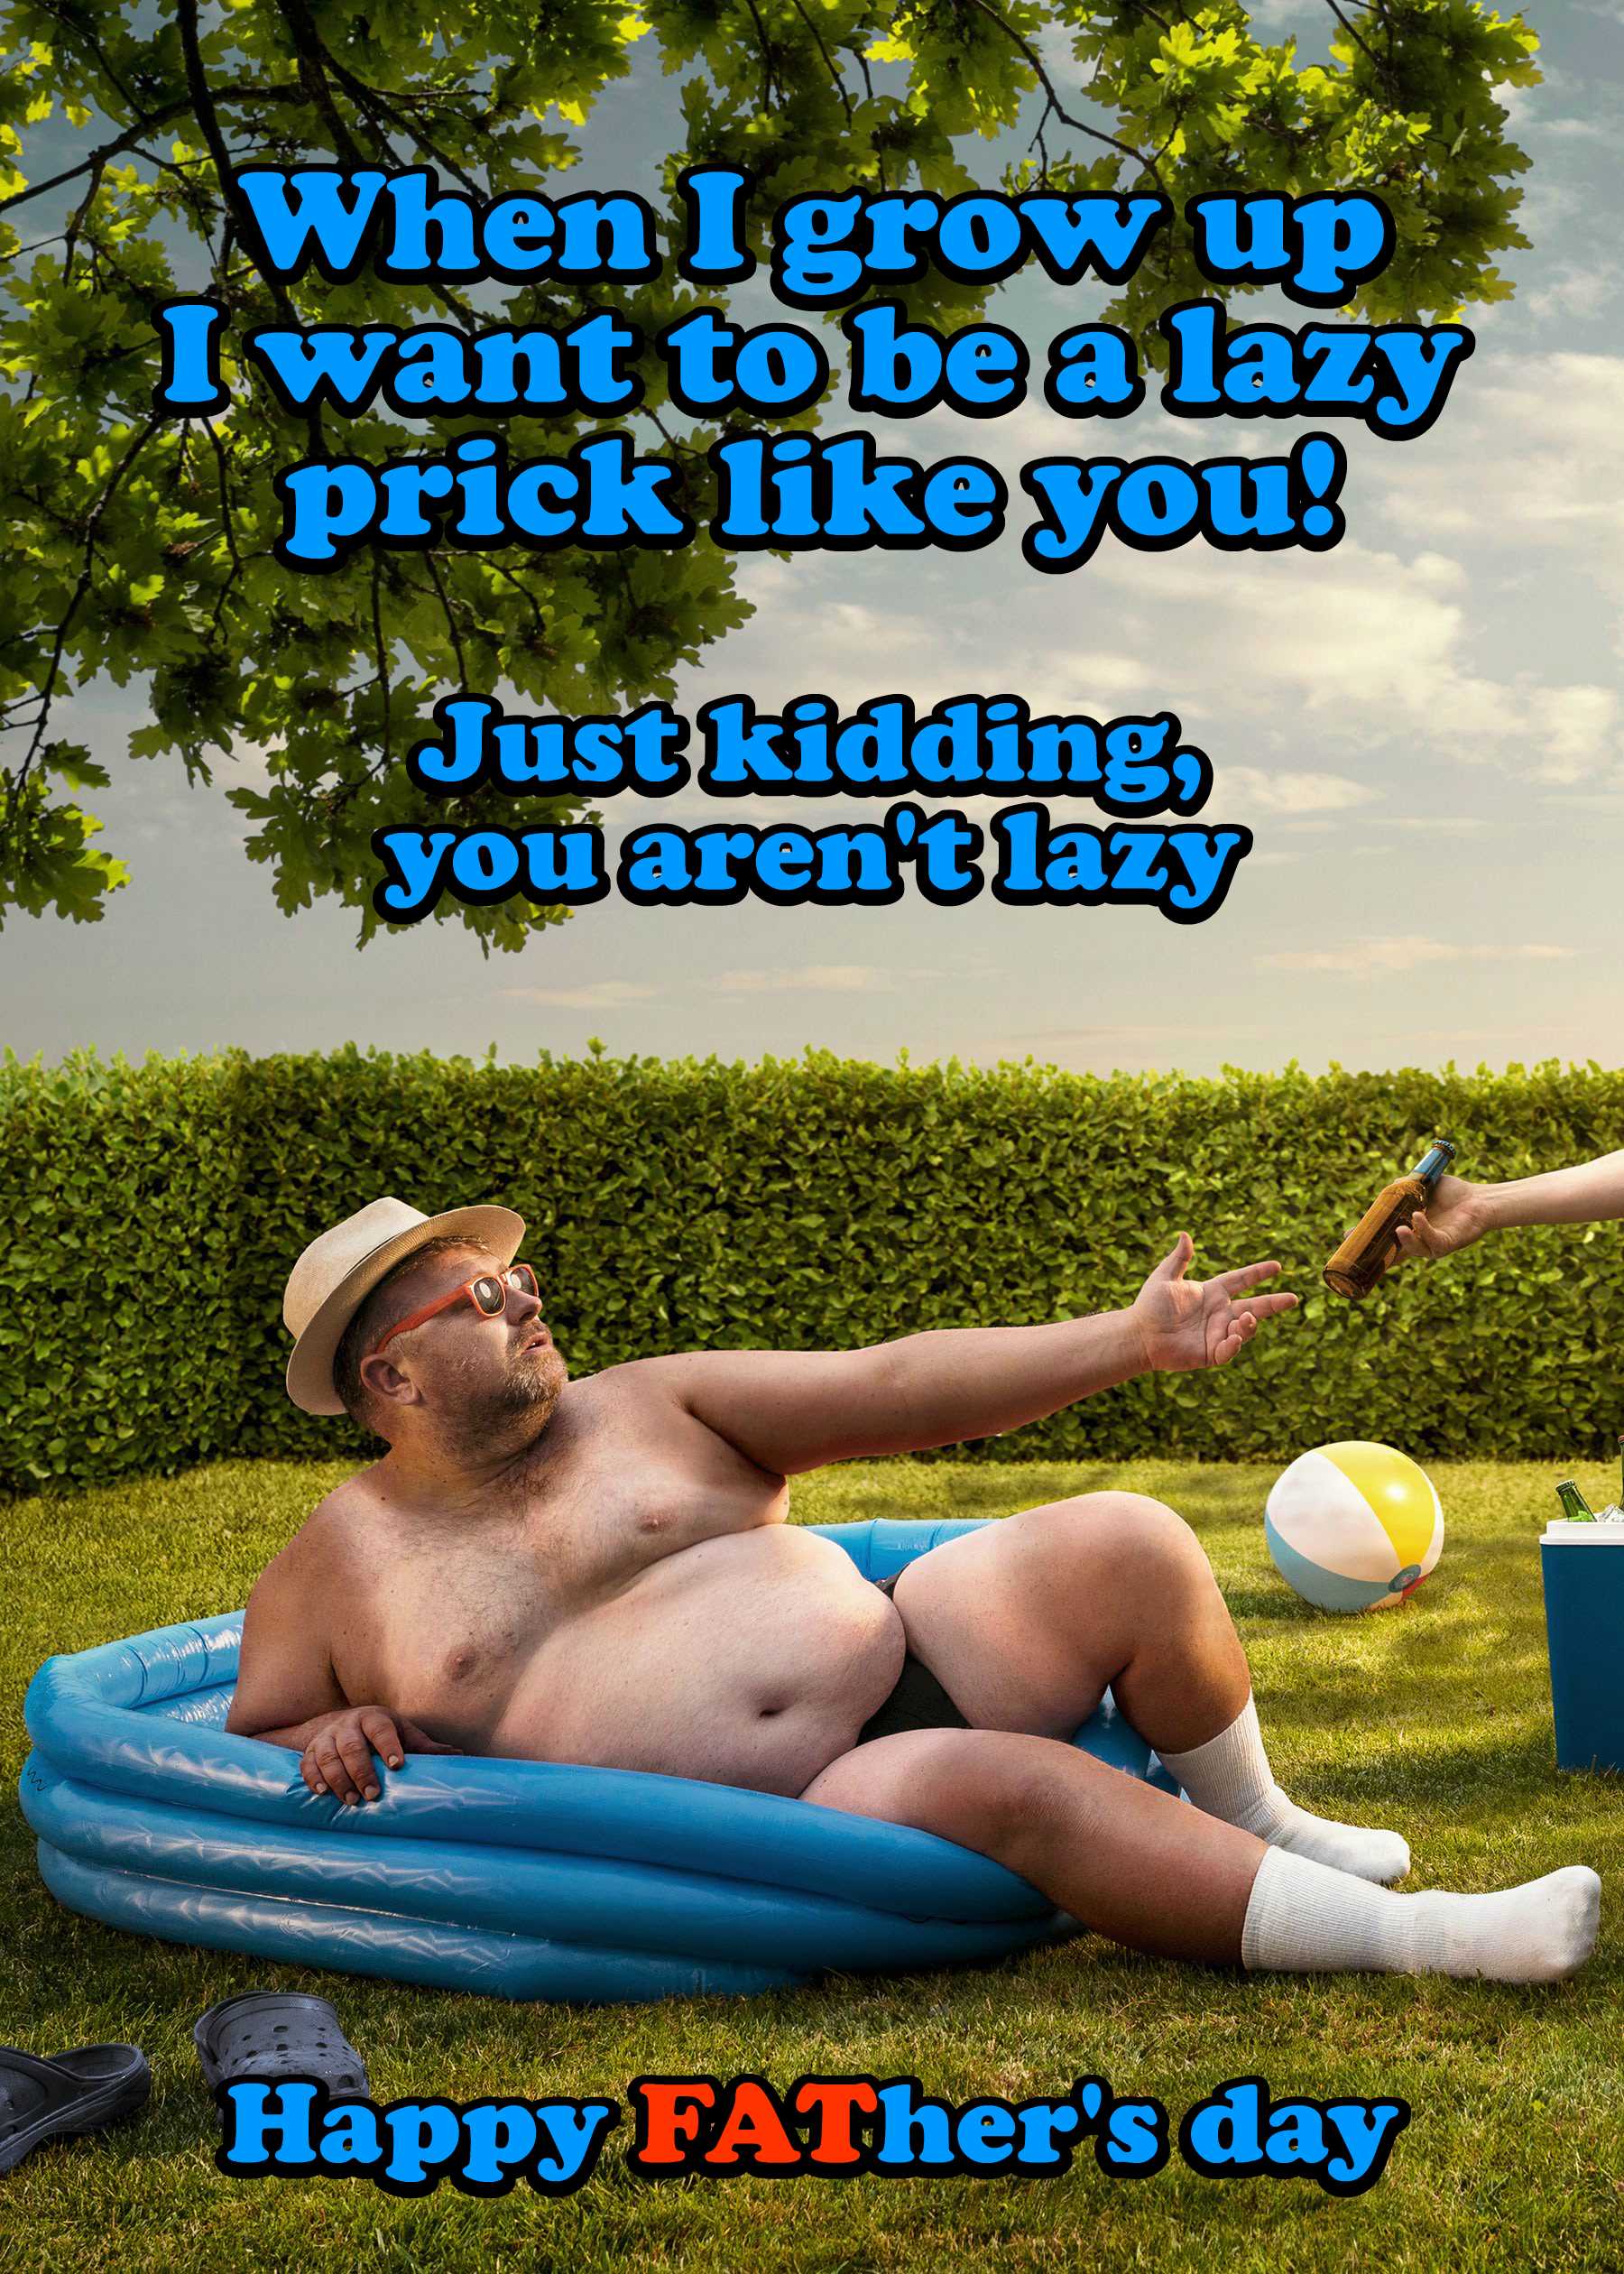 A man wearing a hat, glasses, and shorts is lounging on an inflatable pool outdoors, being handed a drink. The image features humorous text perfect for a When I Grow Up Funny Fathers Day Card by Twisted Gifts.